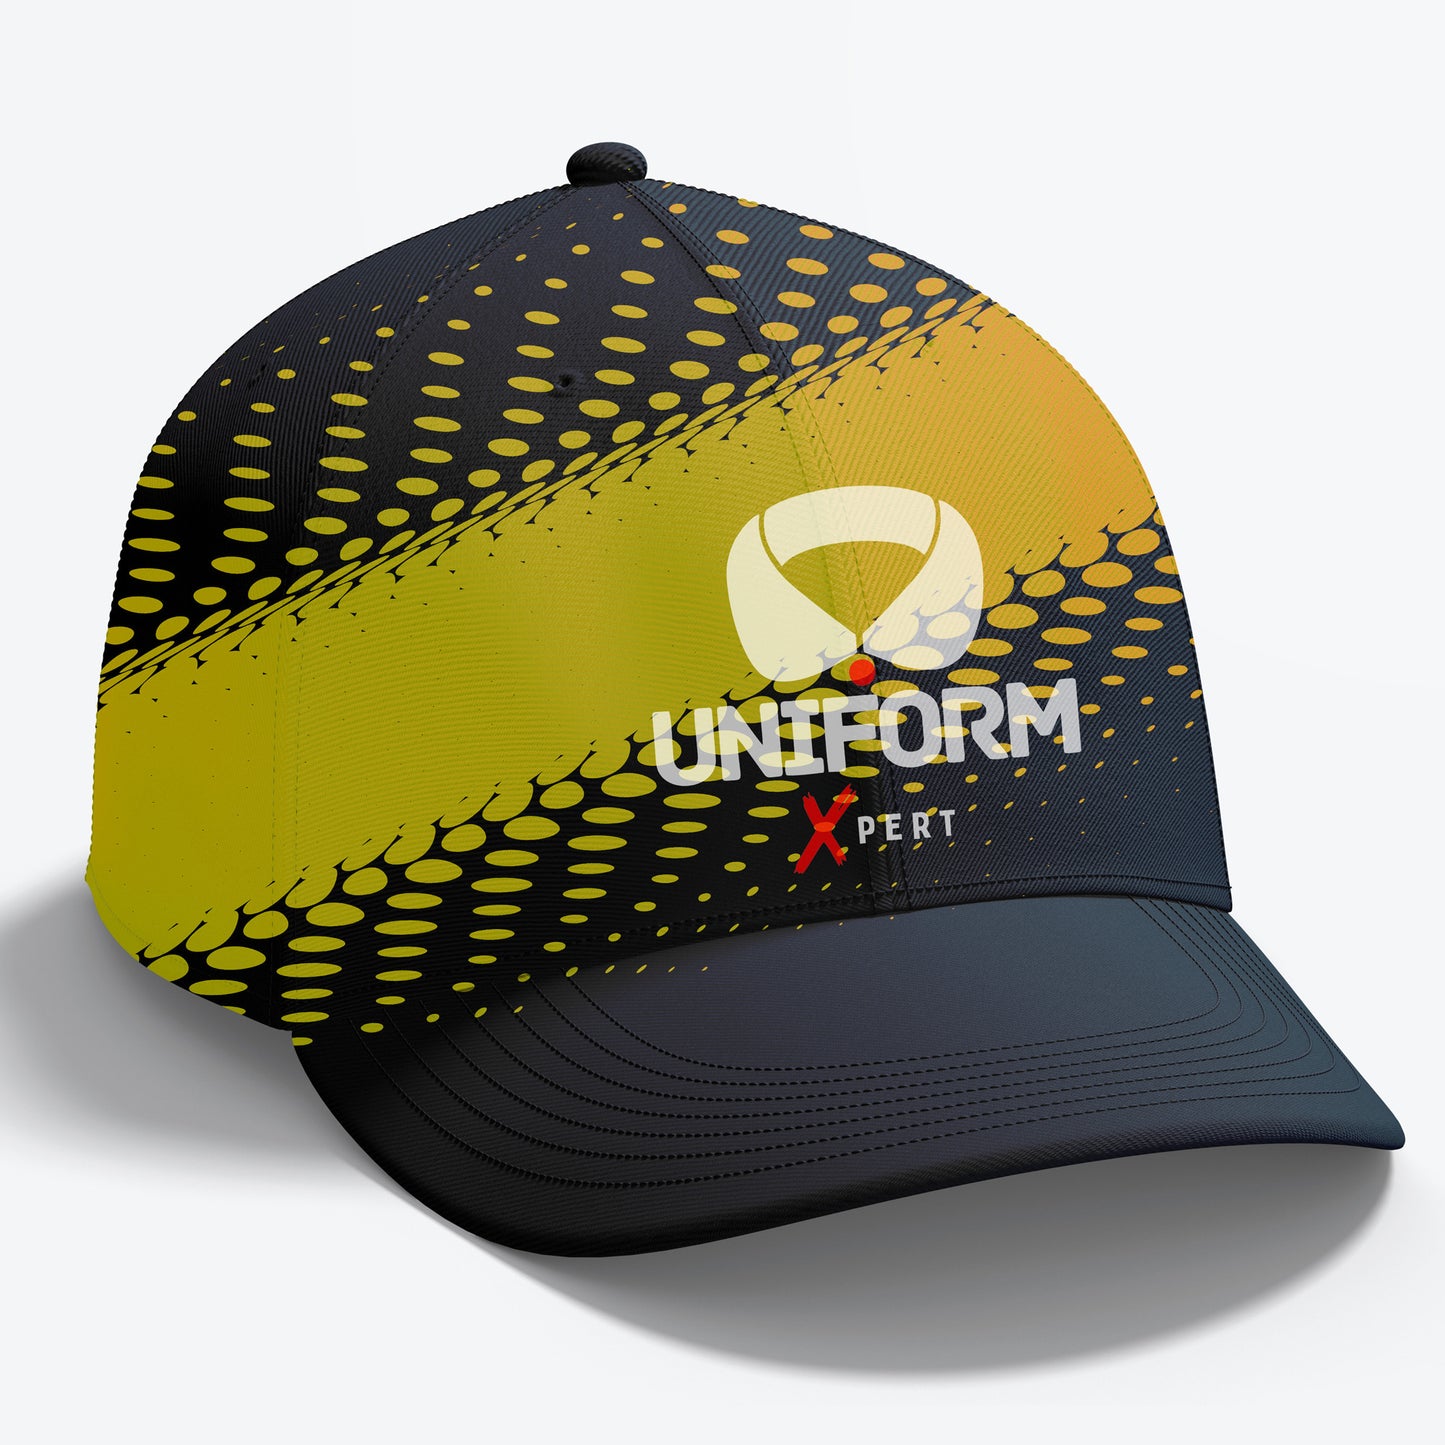 Custom Sports Caps | Tailored Sportswear Accessories for Athletes